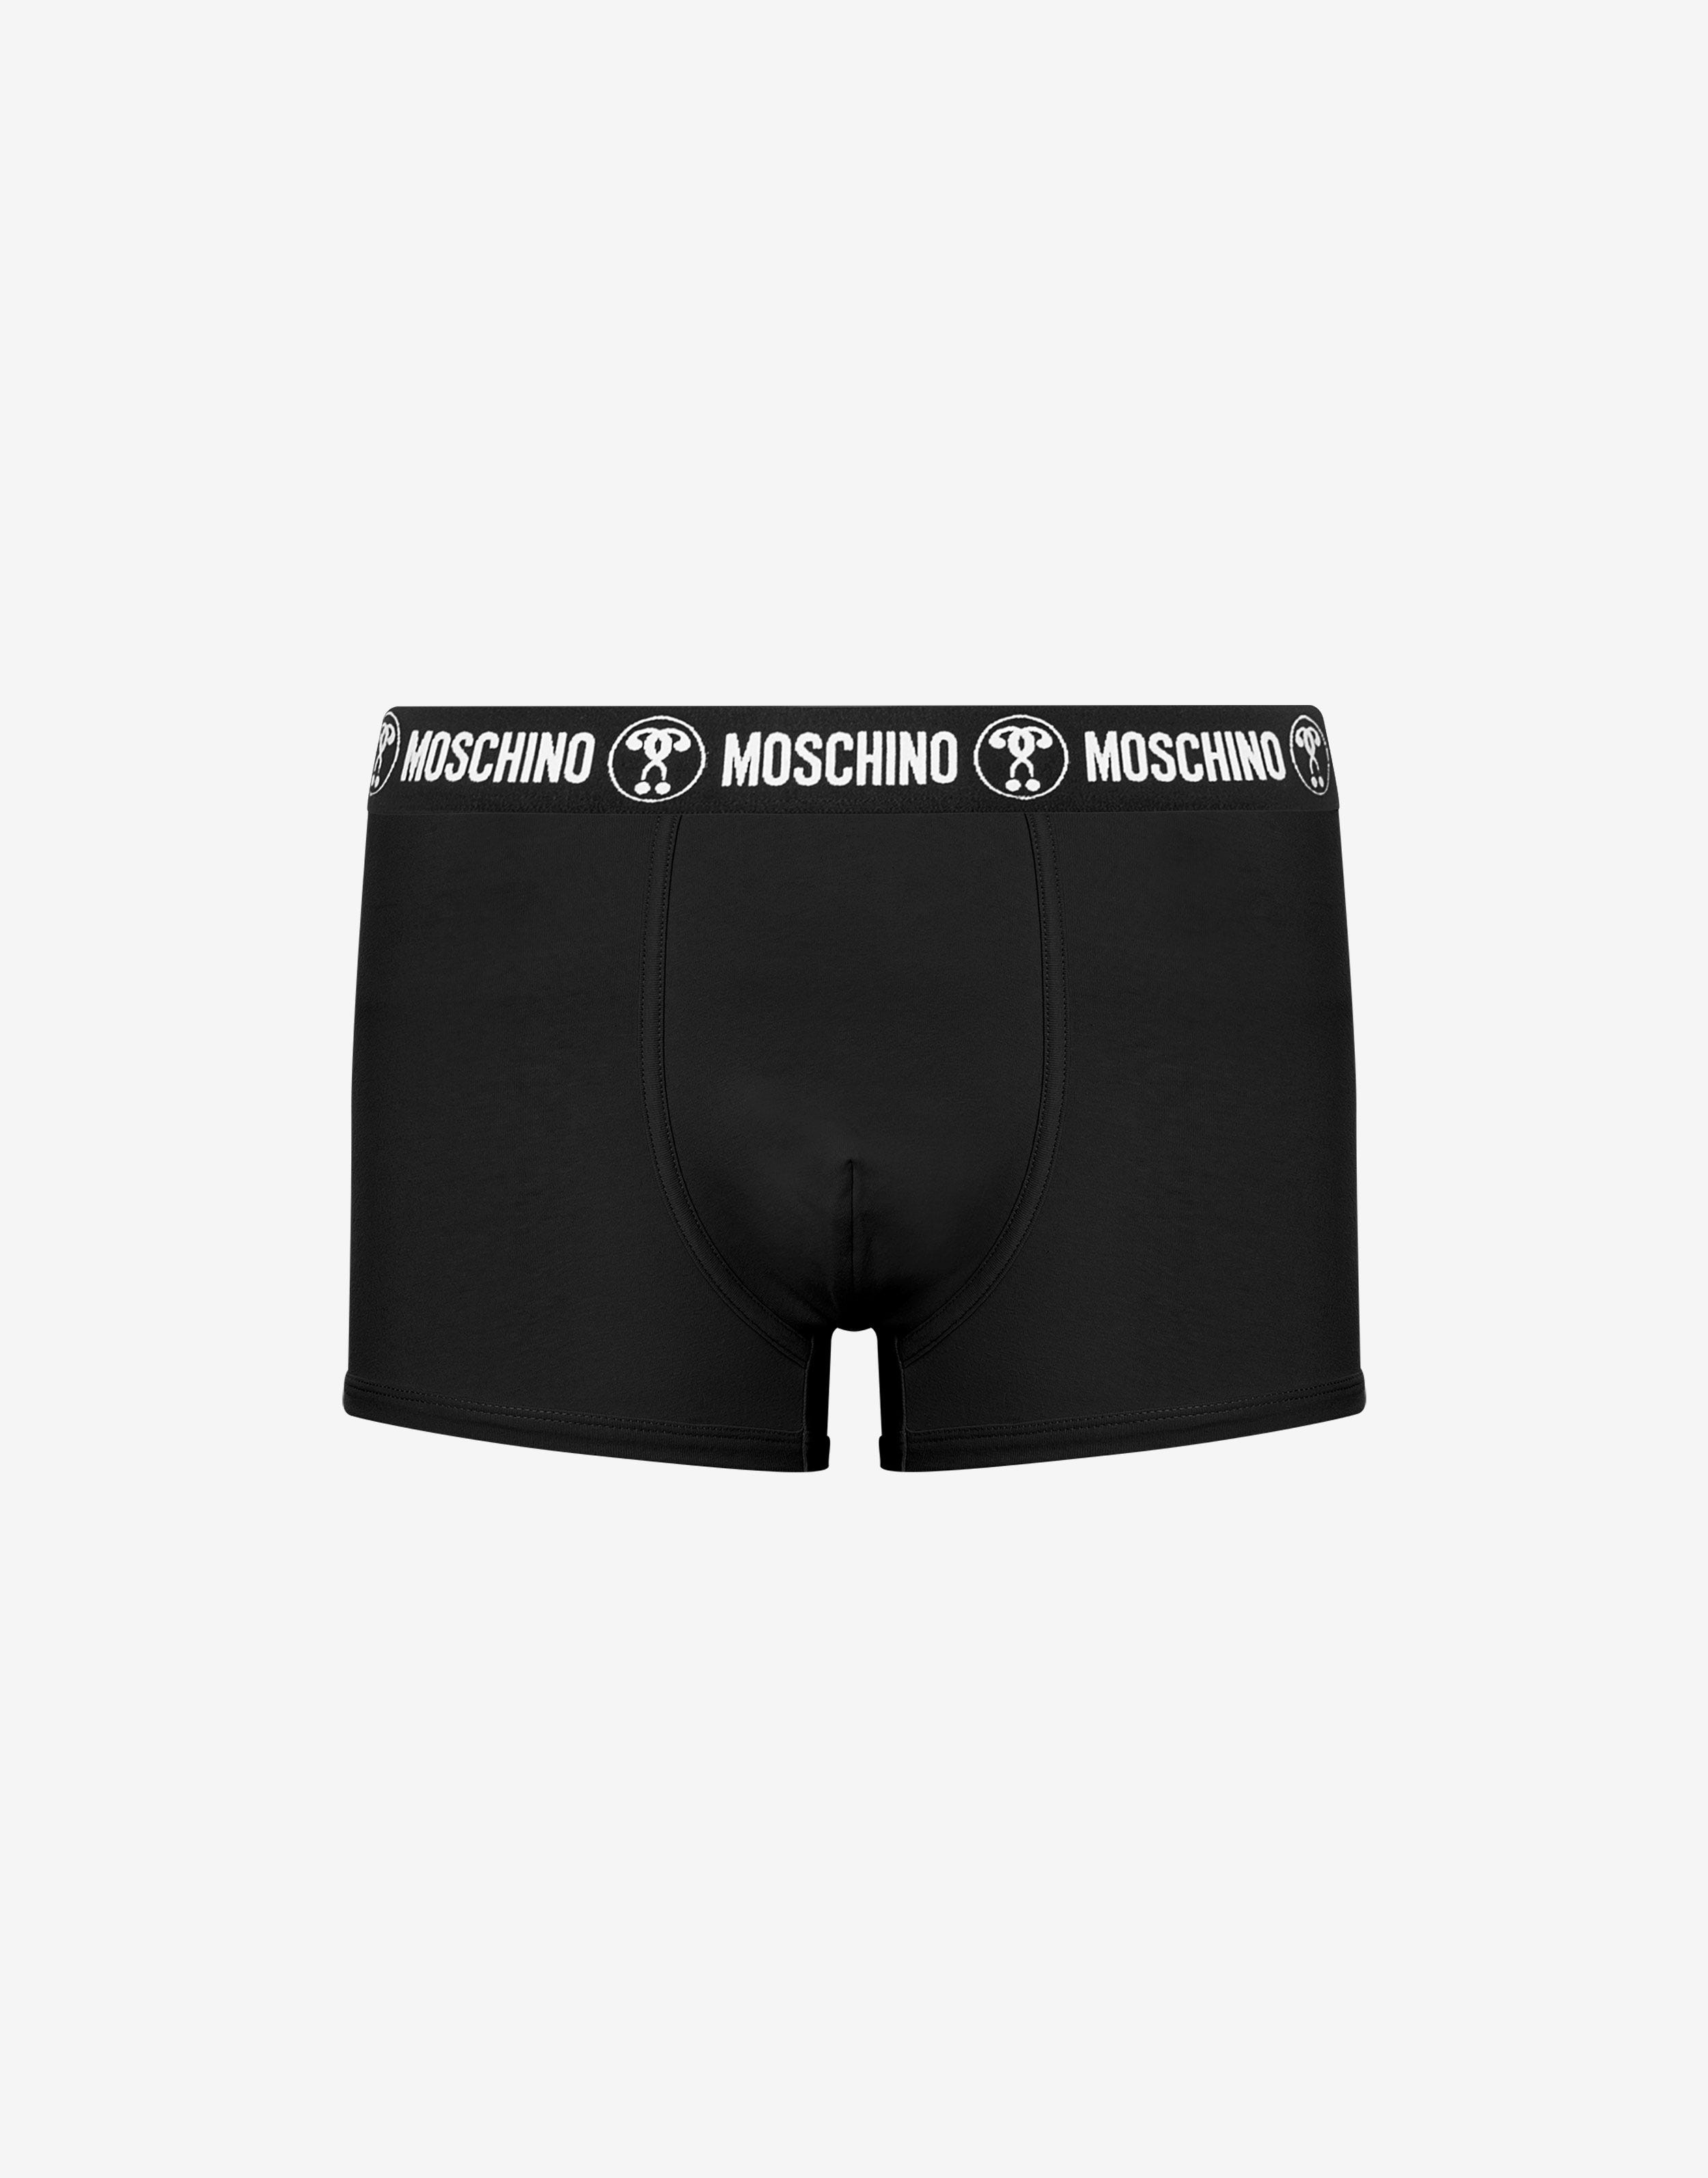 DOUBLE QUESTION MARK JERSEY BOXER - 1